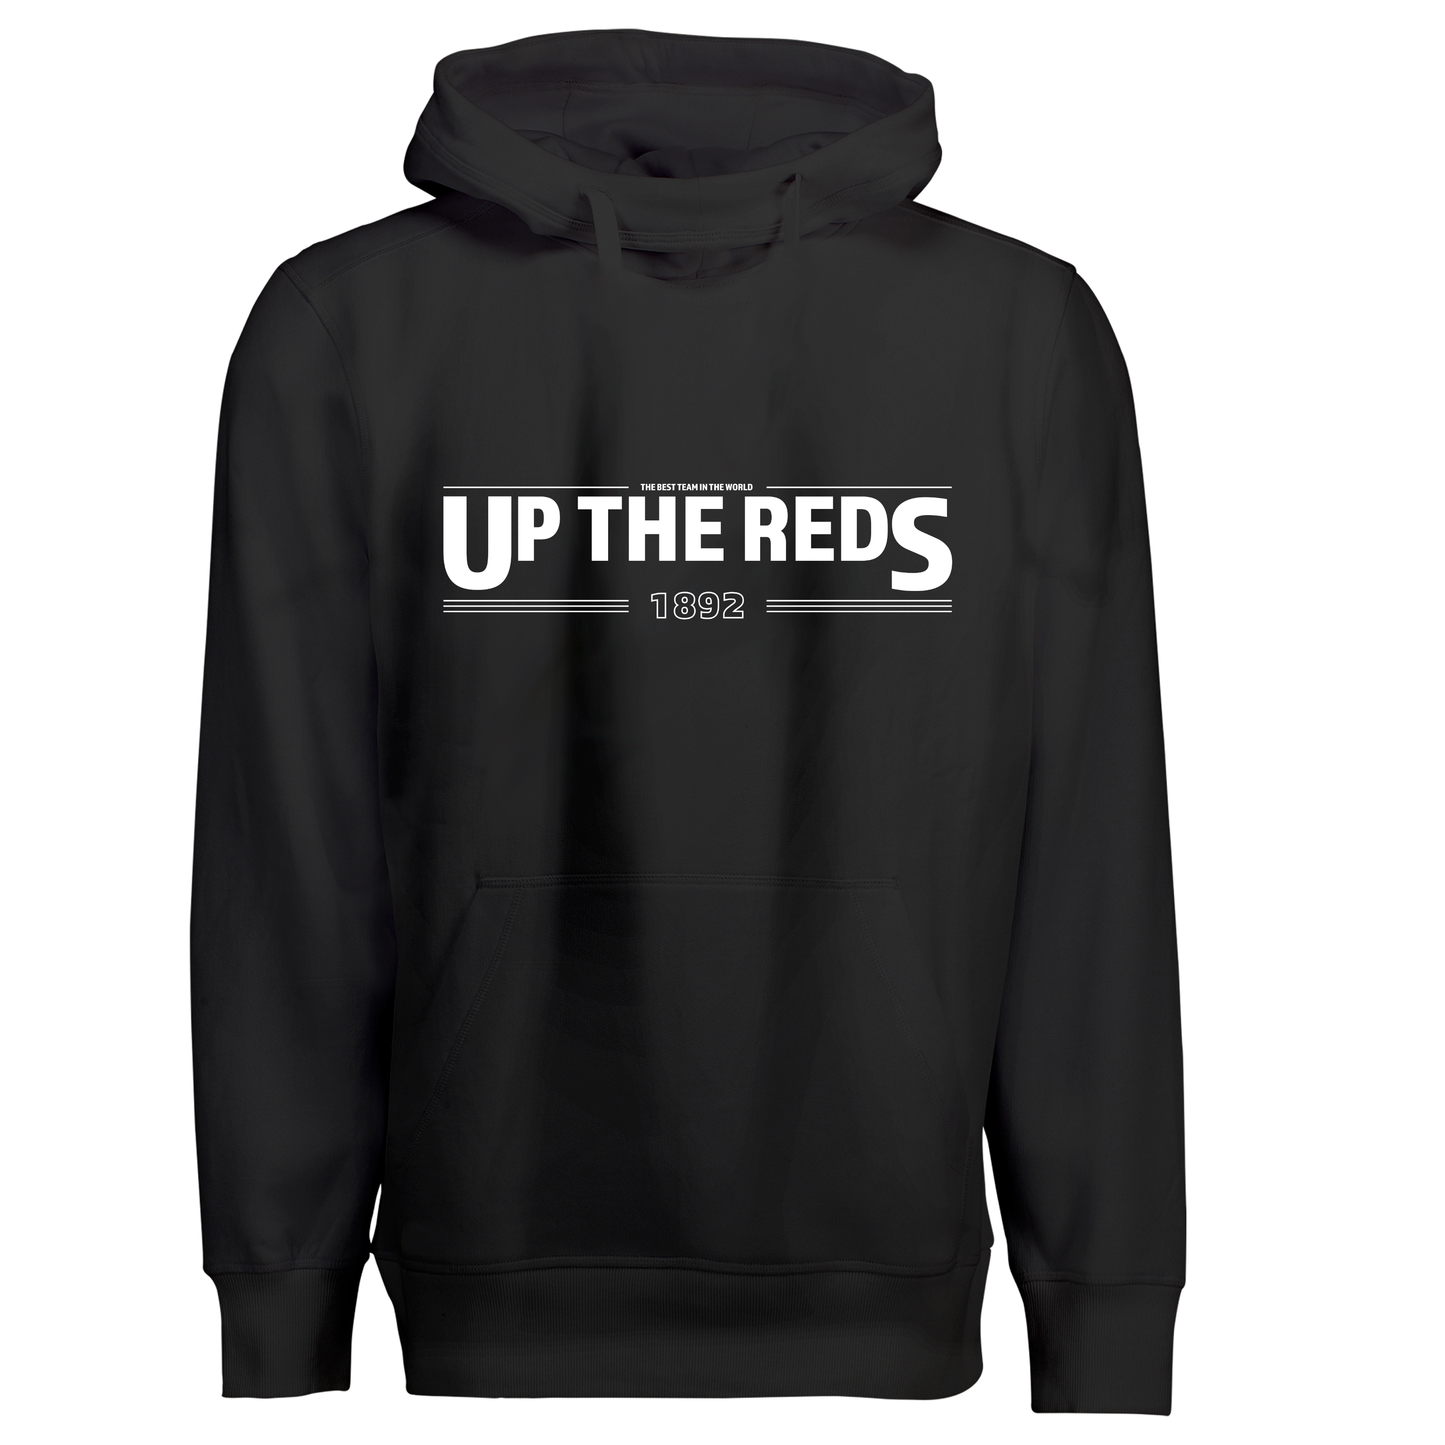 UP THE REDS - Hoodie